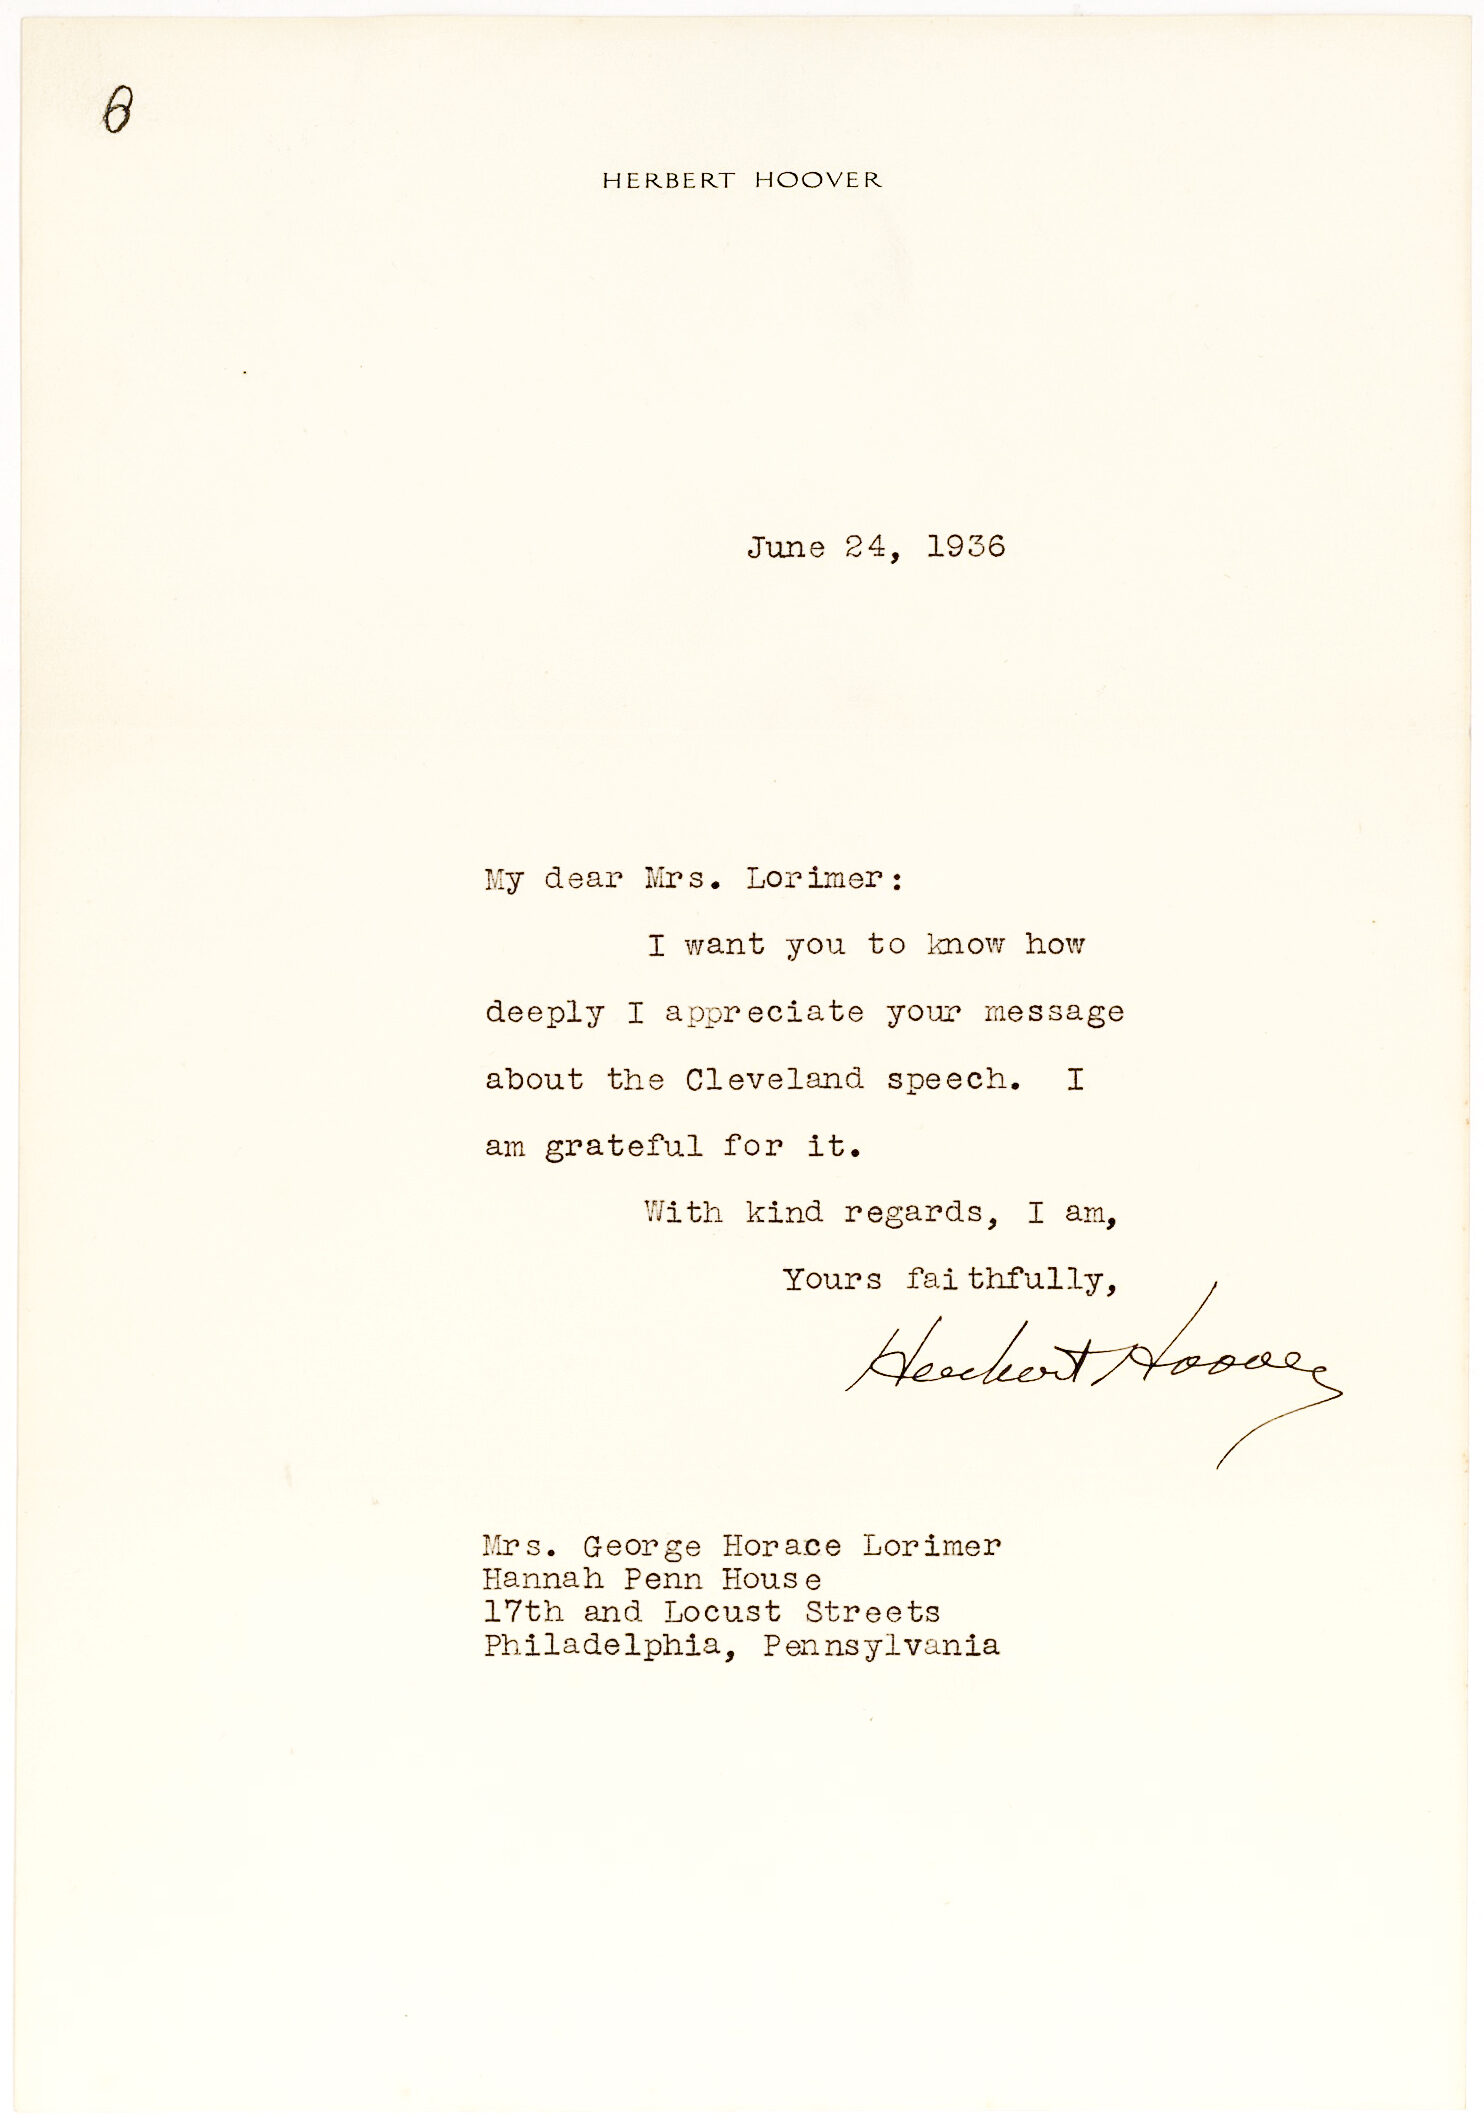 Thank You Letter to Mrs. George H. Lorimer, Wife Saturday Evening Post Editor